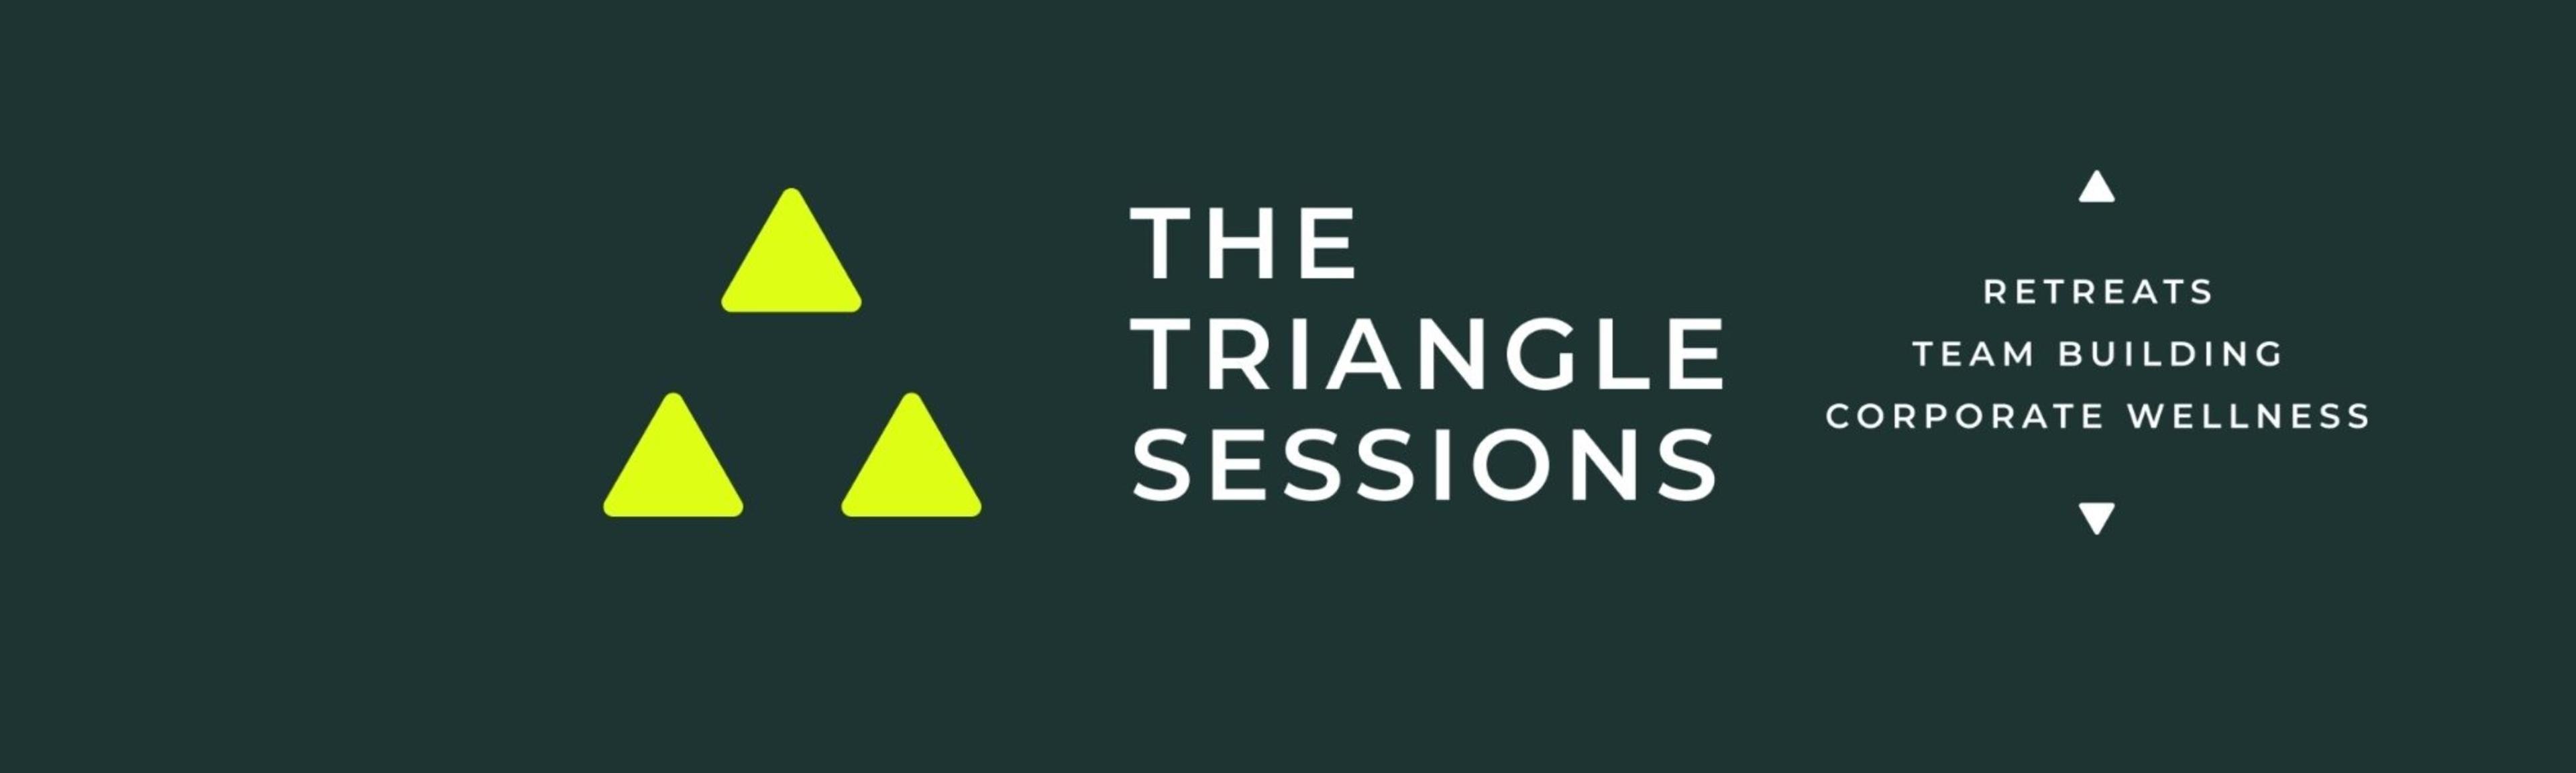 The Triangle Sessions 